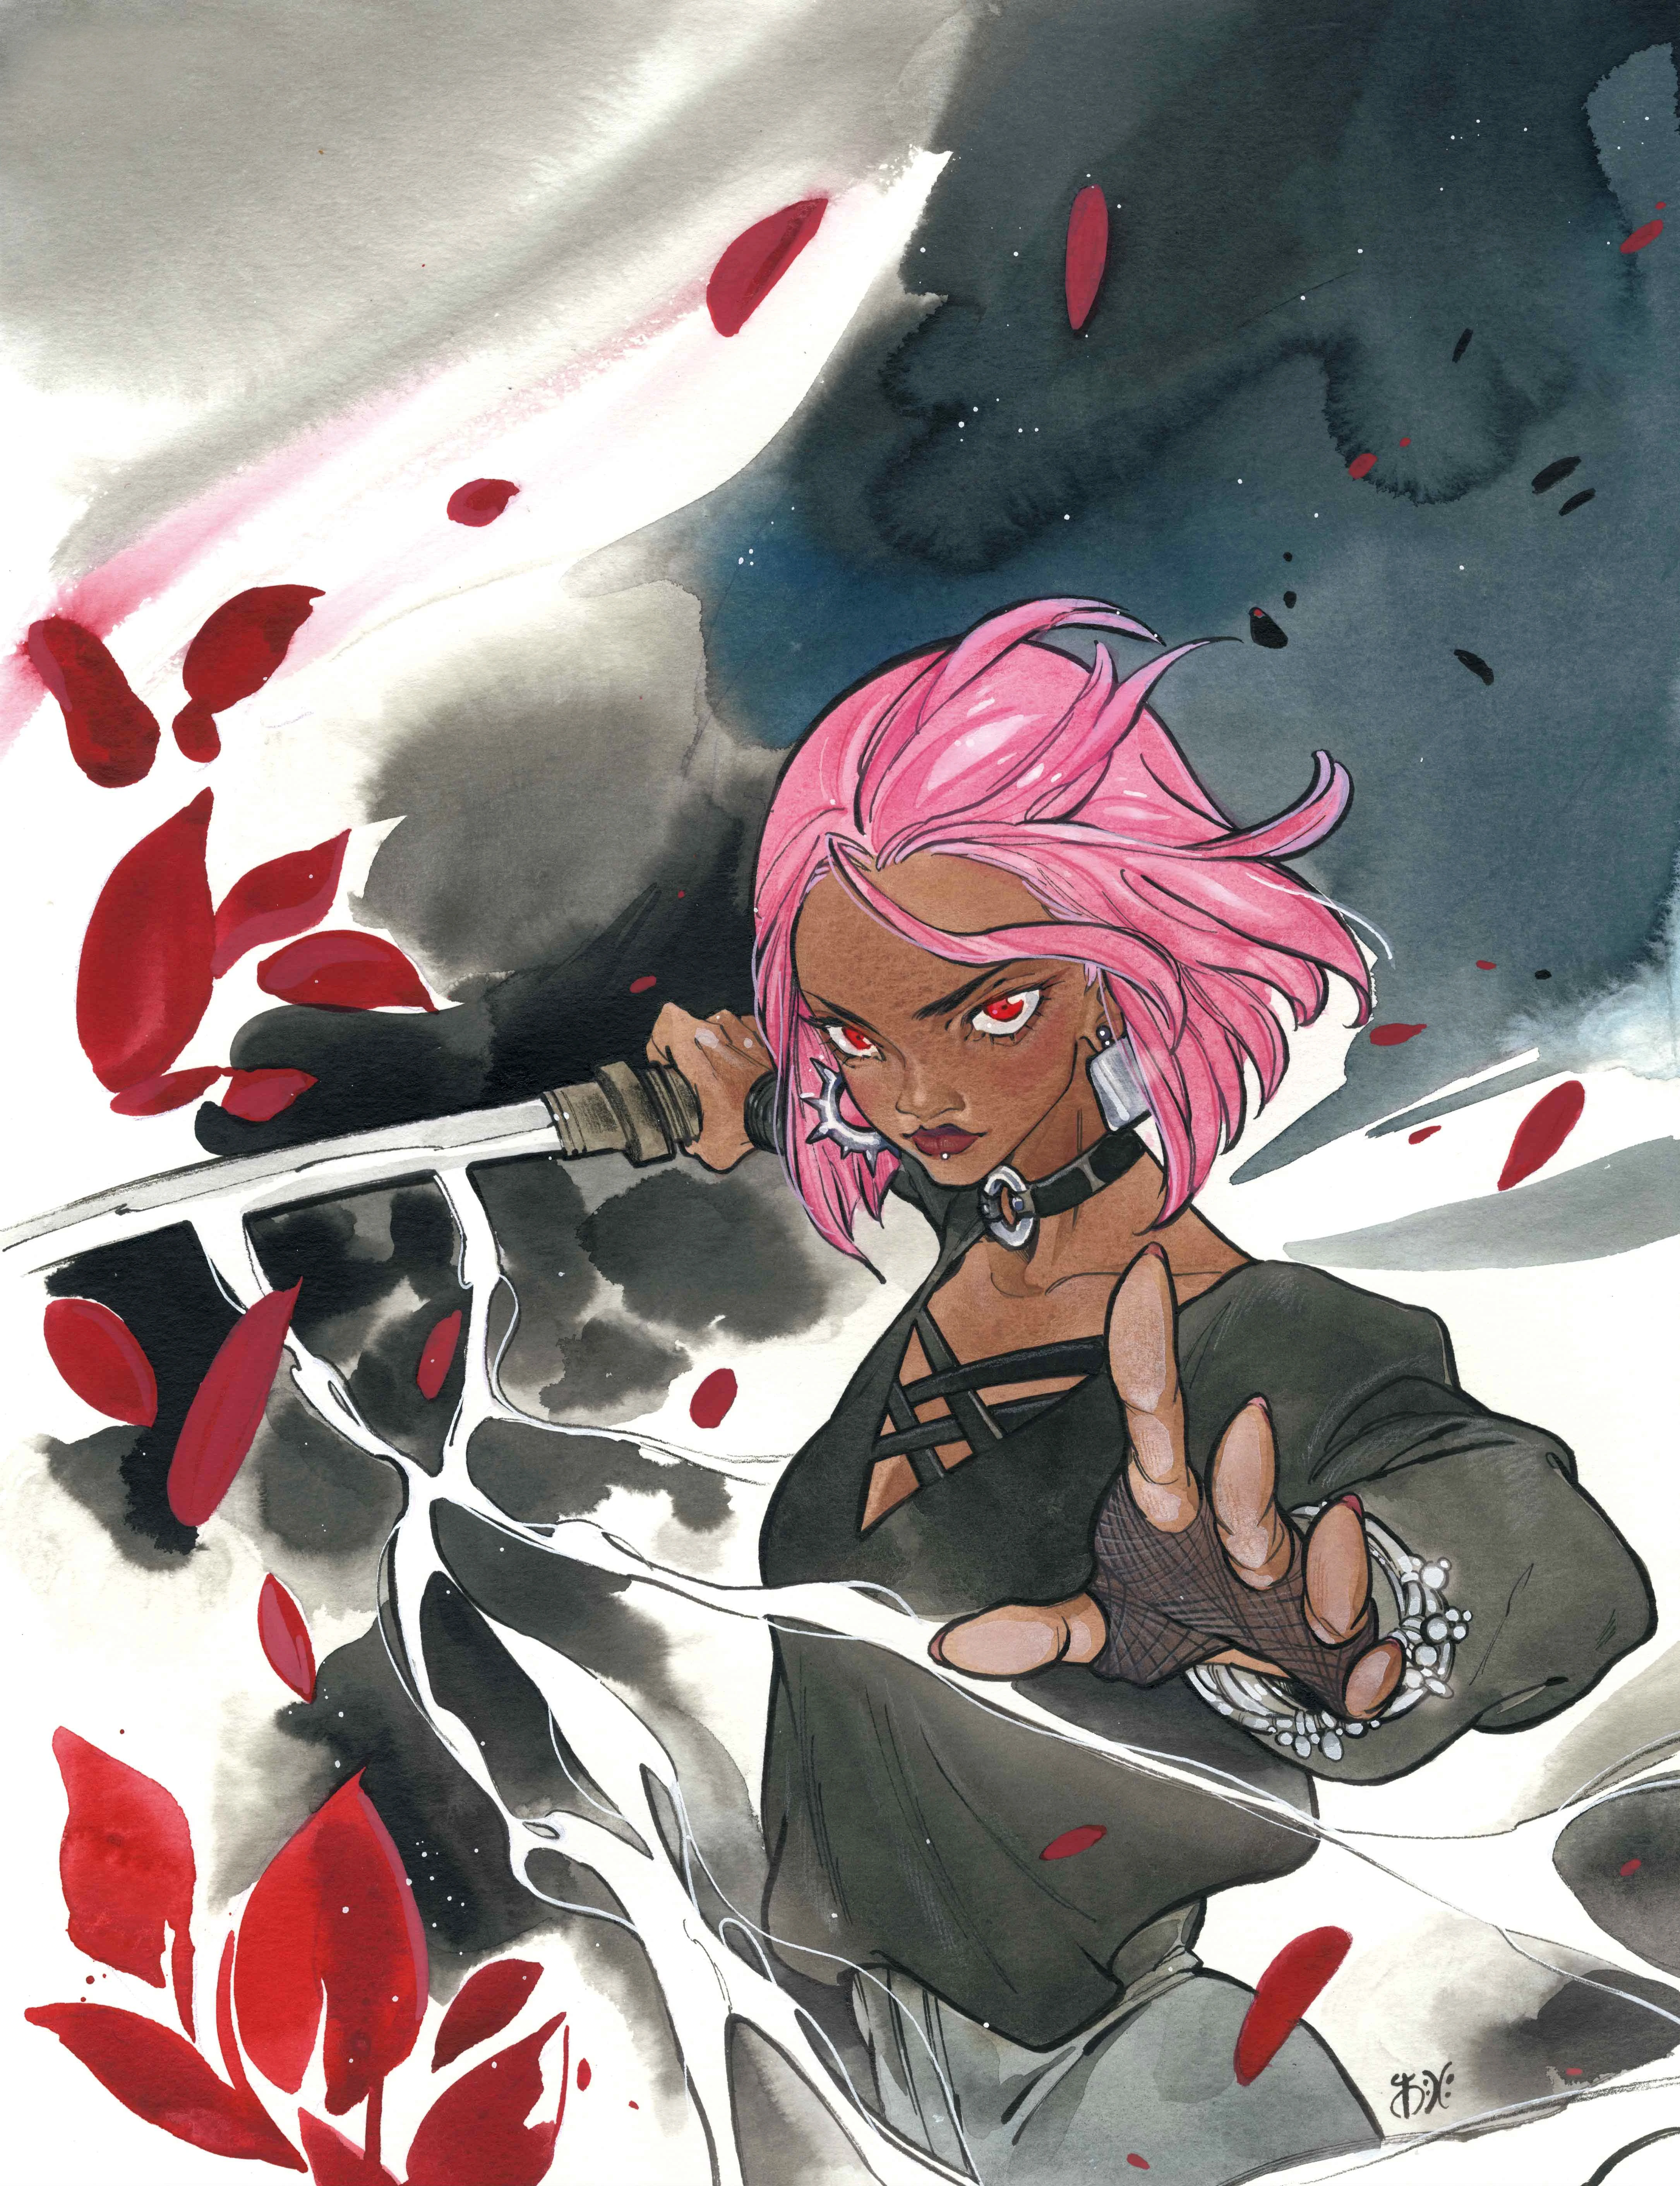 Brielle Brooks draws her blade on Peach Momoko's Women's History Month Variant Cover to Bloodline: Daughter of Blade Vol. 1 #2 (2023), Marvel Comics